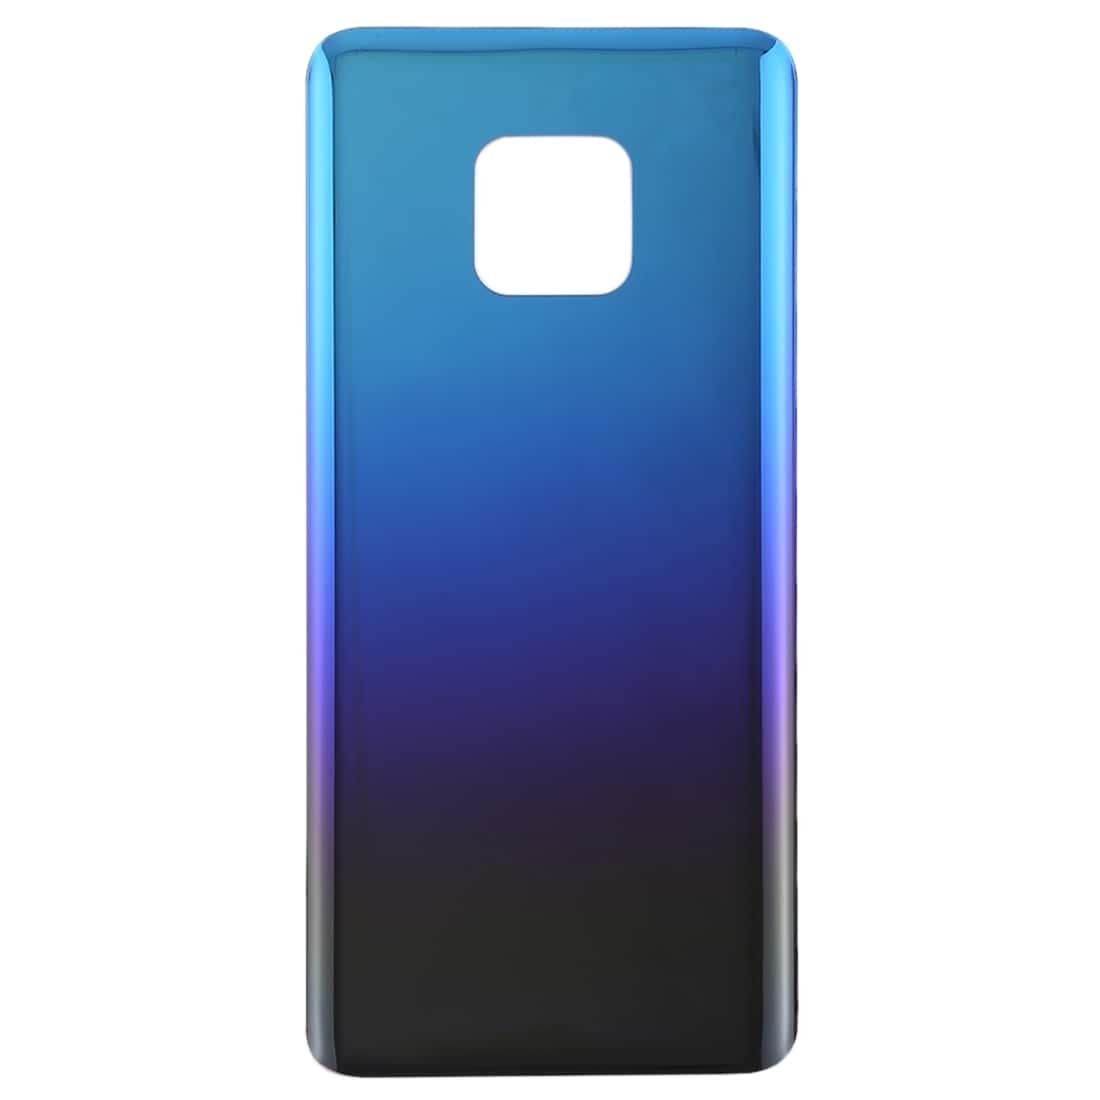 Back Glass Panel for  Huawei Mate 20 Pro Twilight Blue